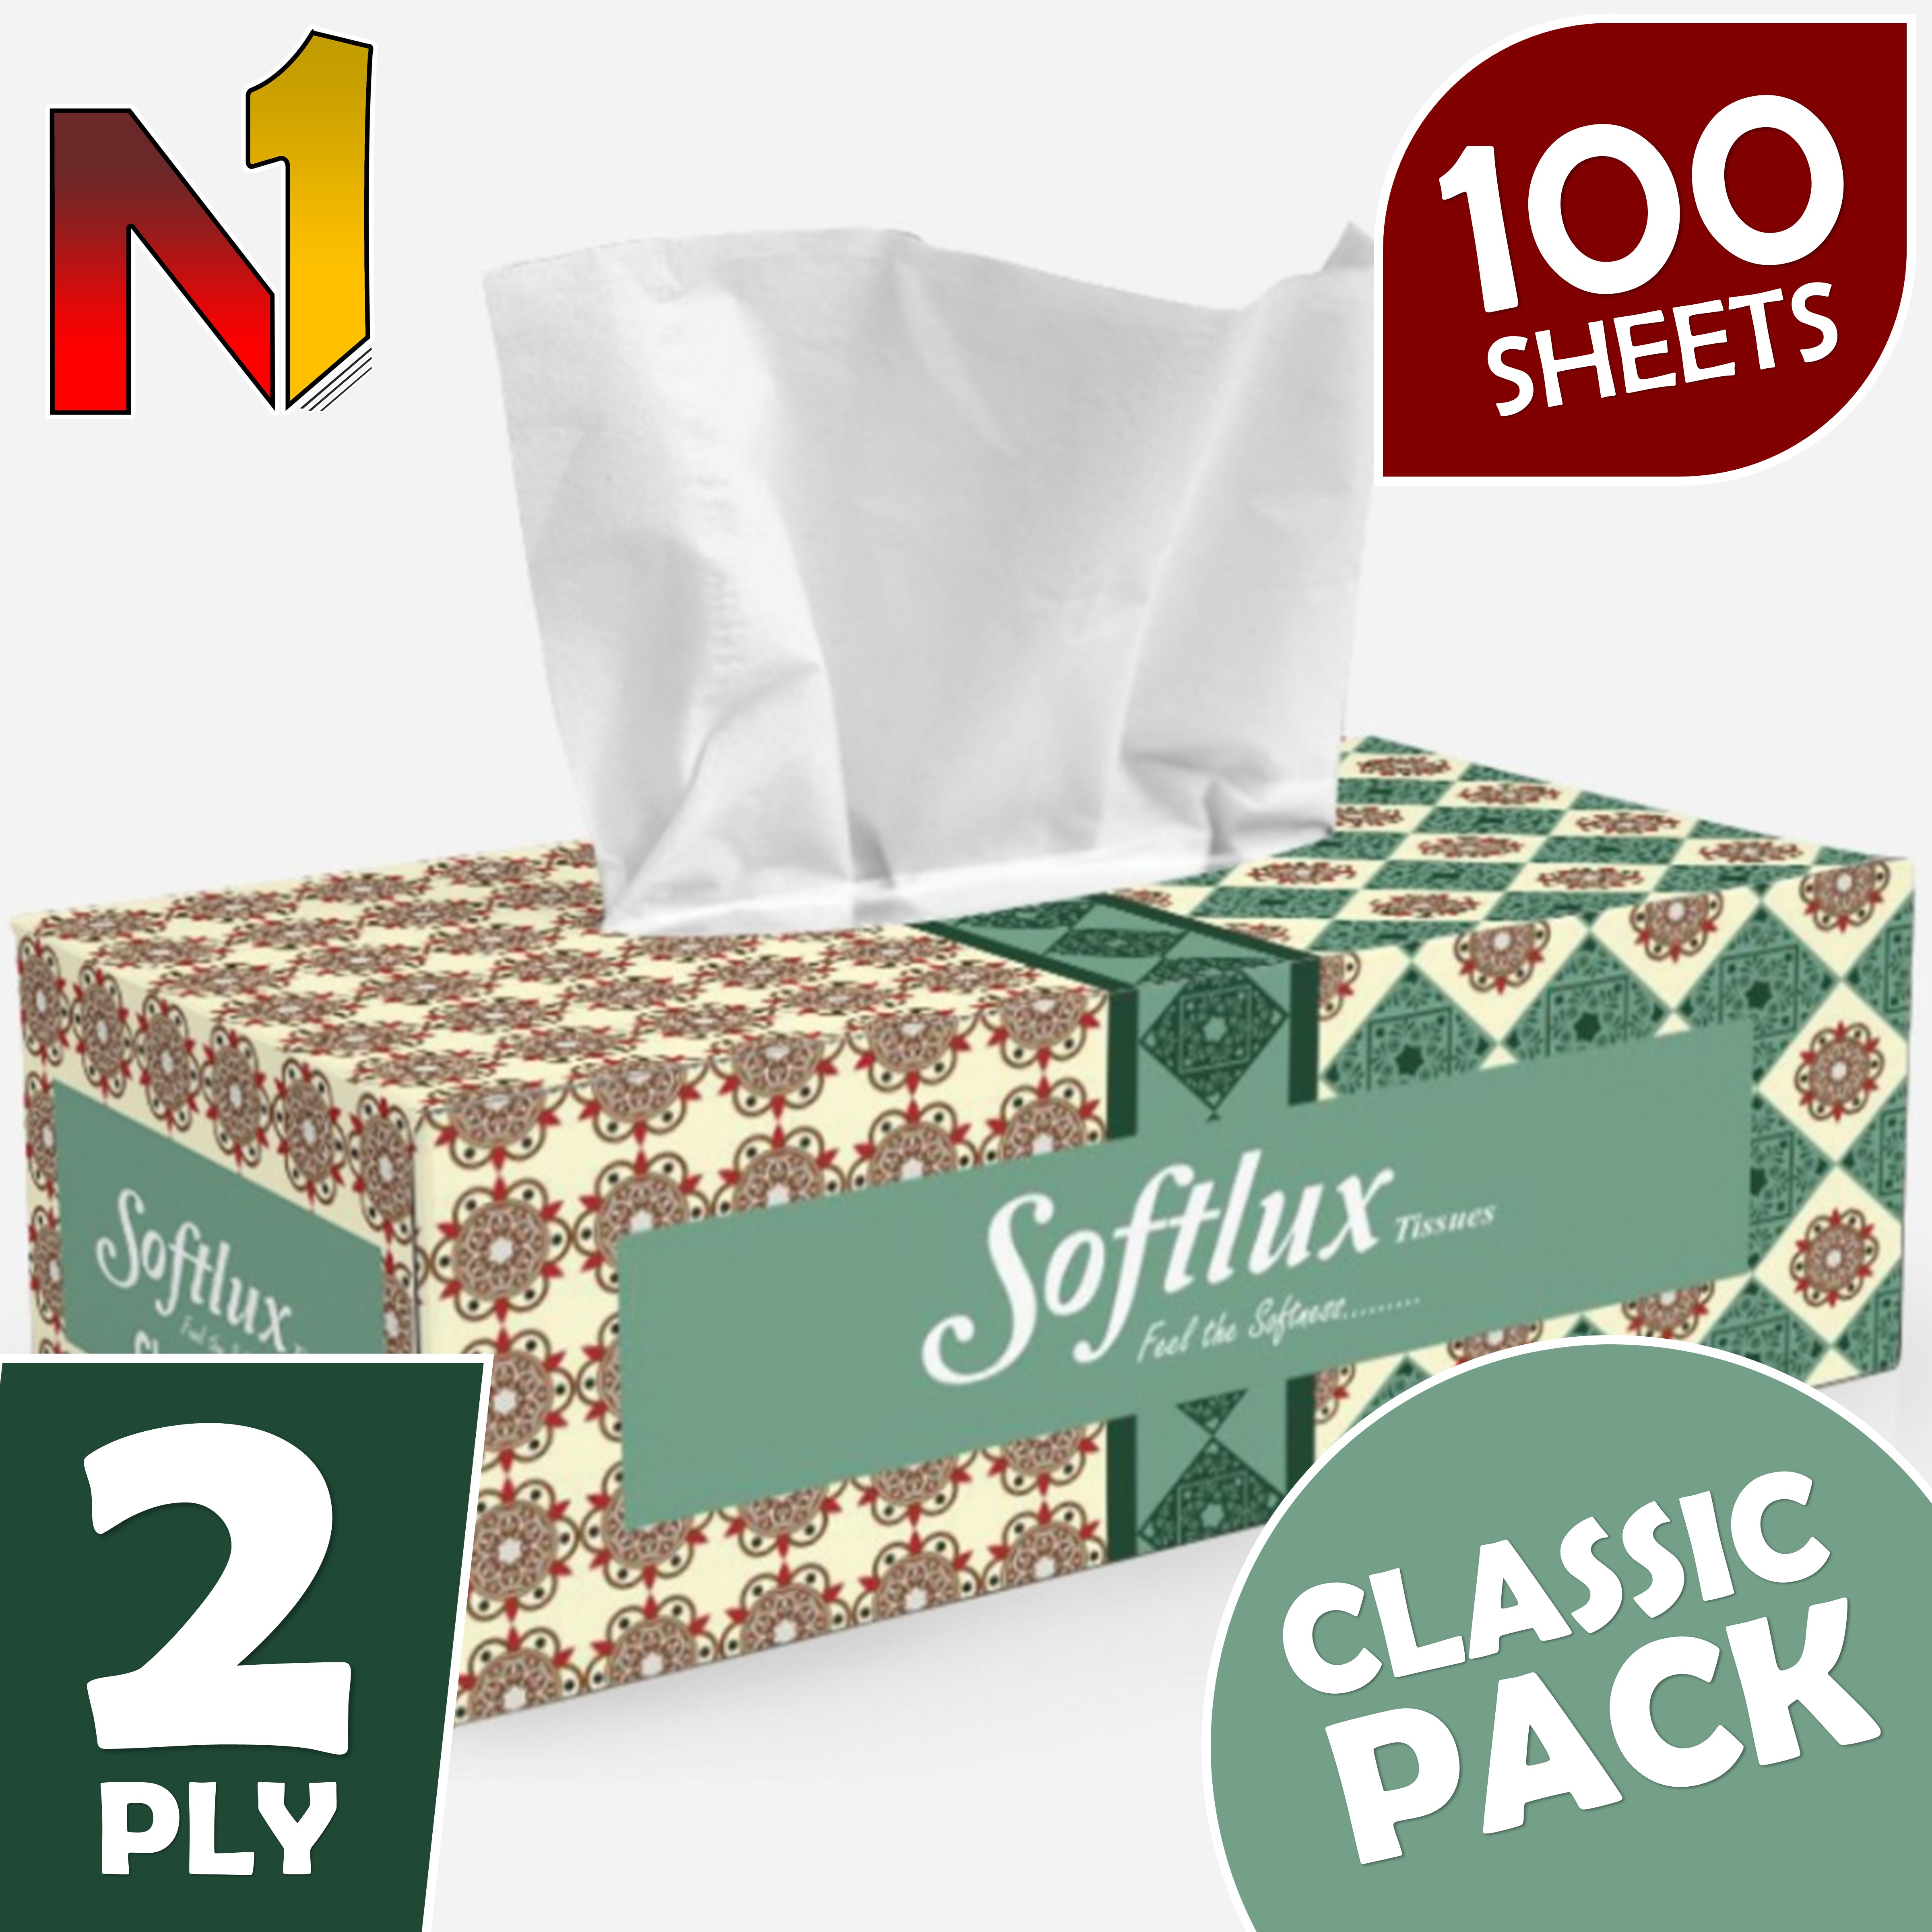 Softlux Tissues - Classic Pack - Best Quality Tissue Box 50x2ply (100 Sheets) - Number One - For Cleaning Face, Office, Home